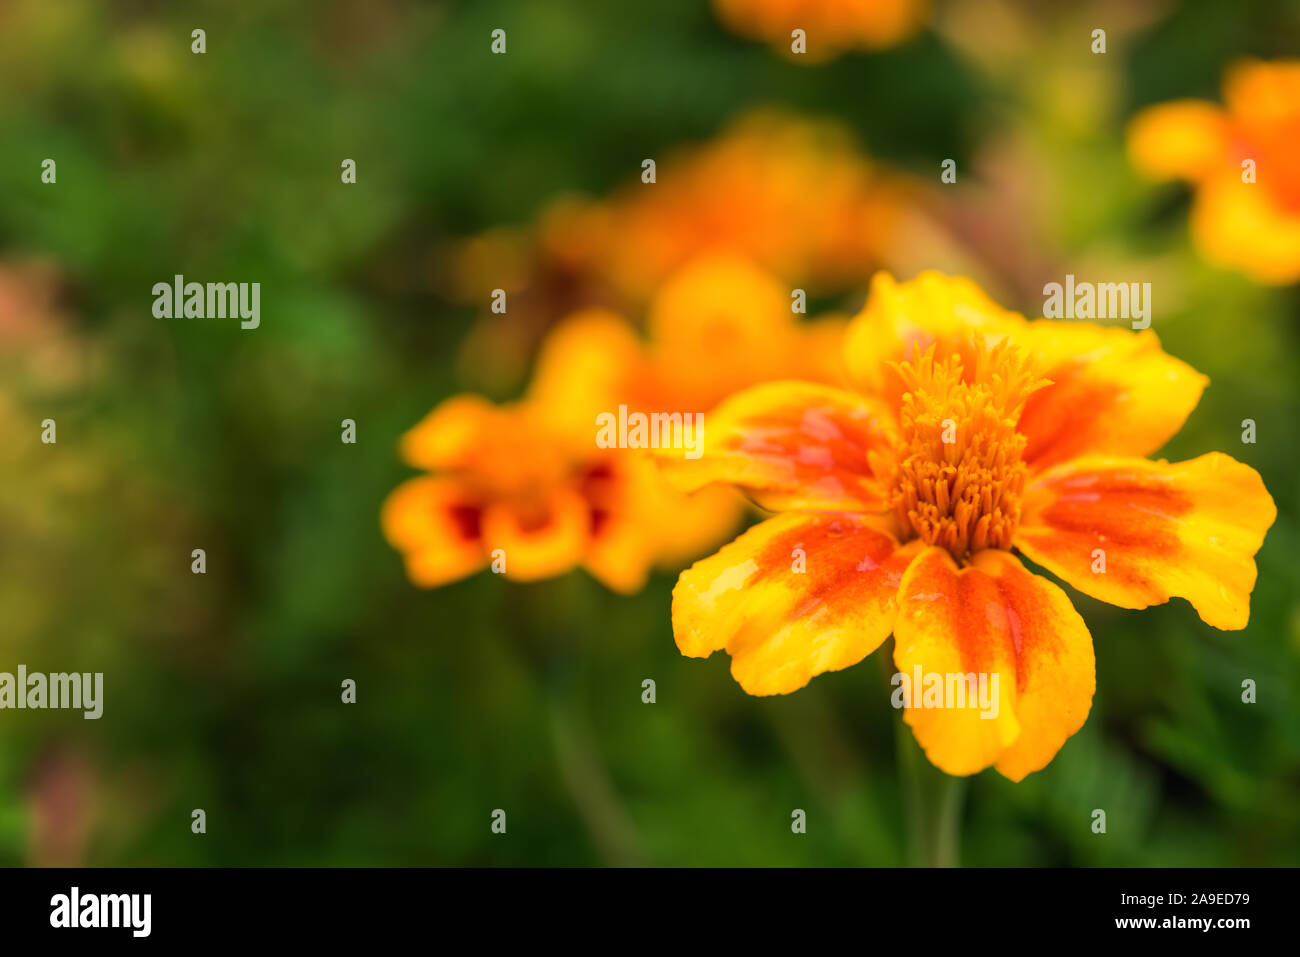 One colorful, bright, yellow and orange red tagetes flower with unfocused green foliage and few flowers at background. Selective focus. Greeting card Stock Photo